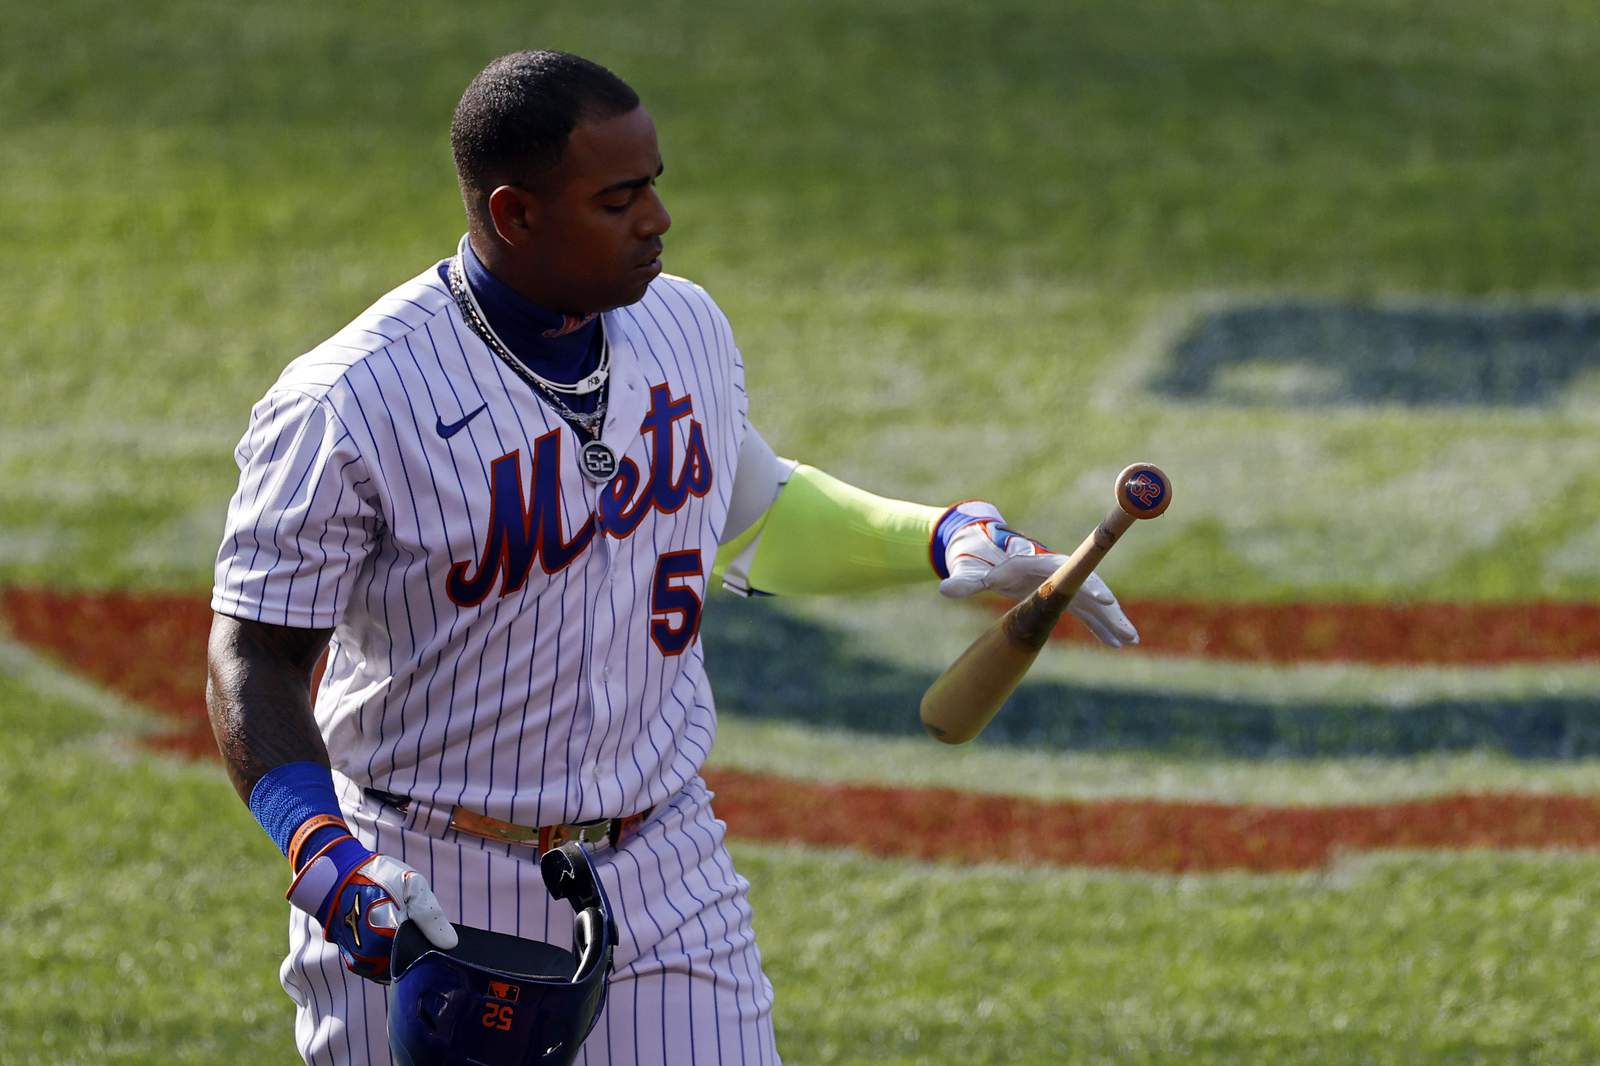 Mets slugger Cspedes leaves team, opts out of 2020 season